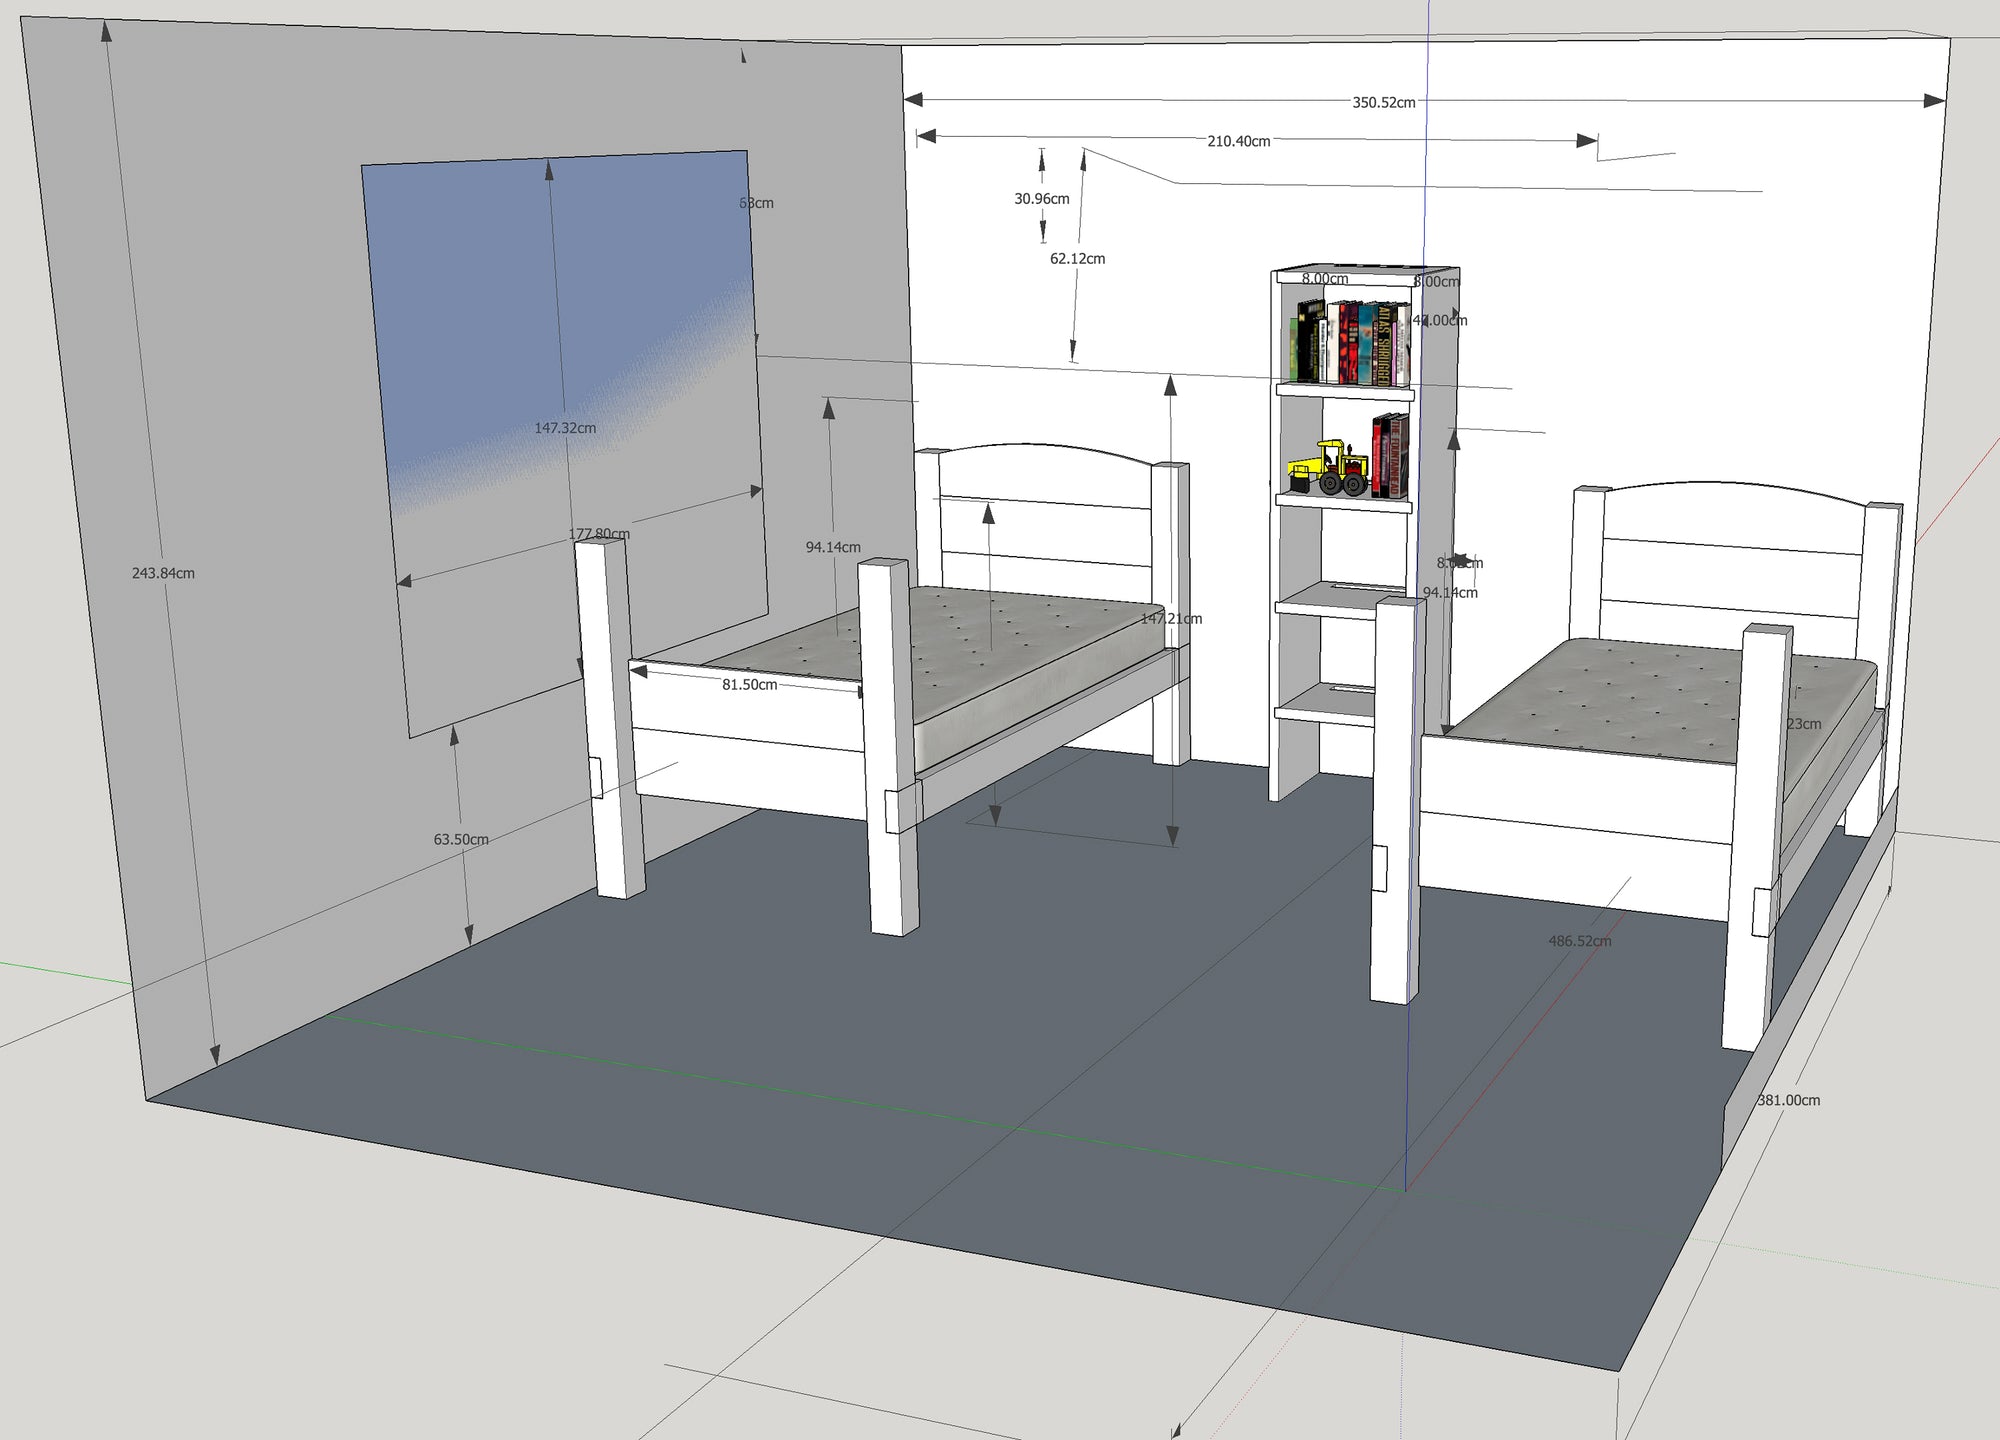 The Modular Twin Bunk Beds (modified to your specifications)